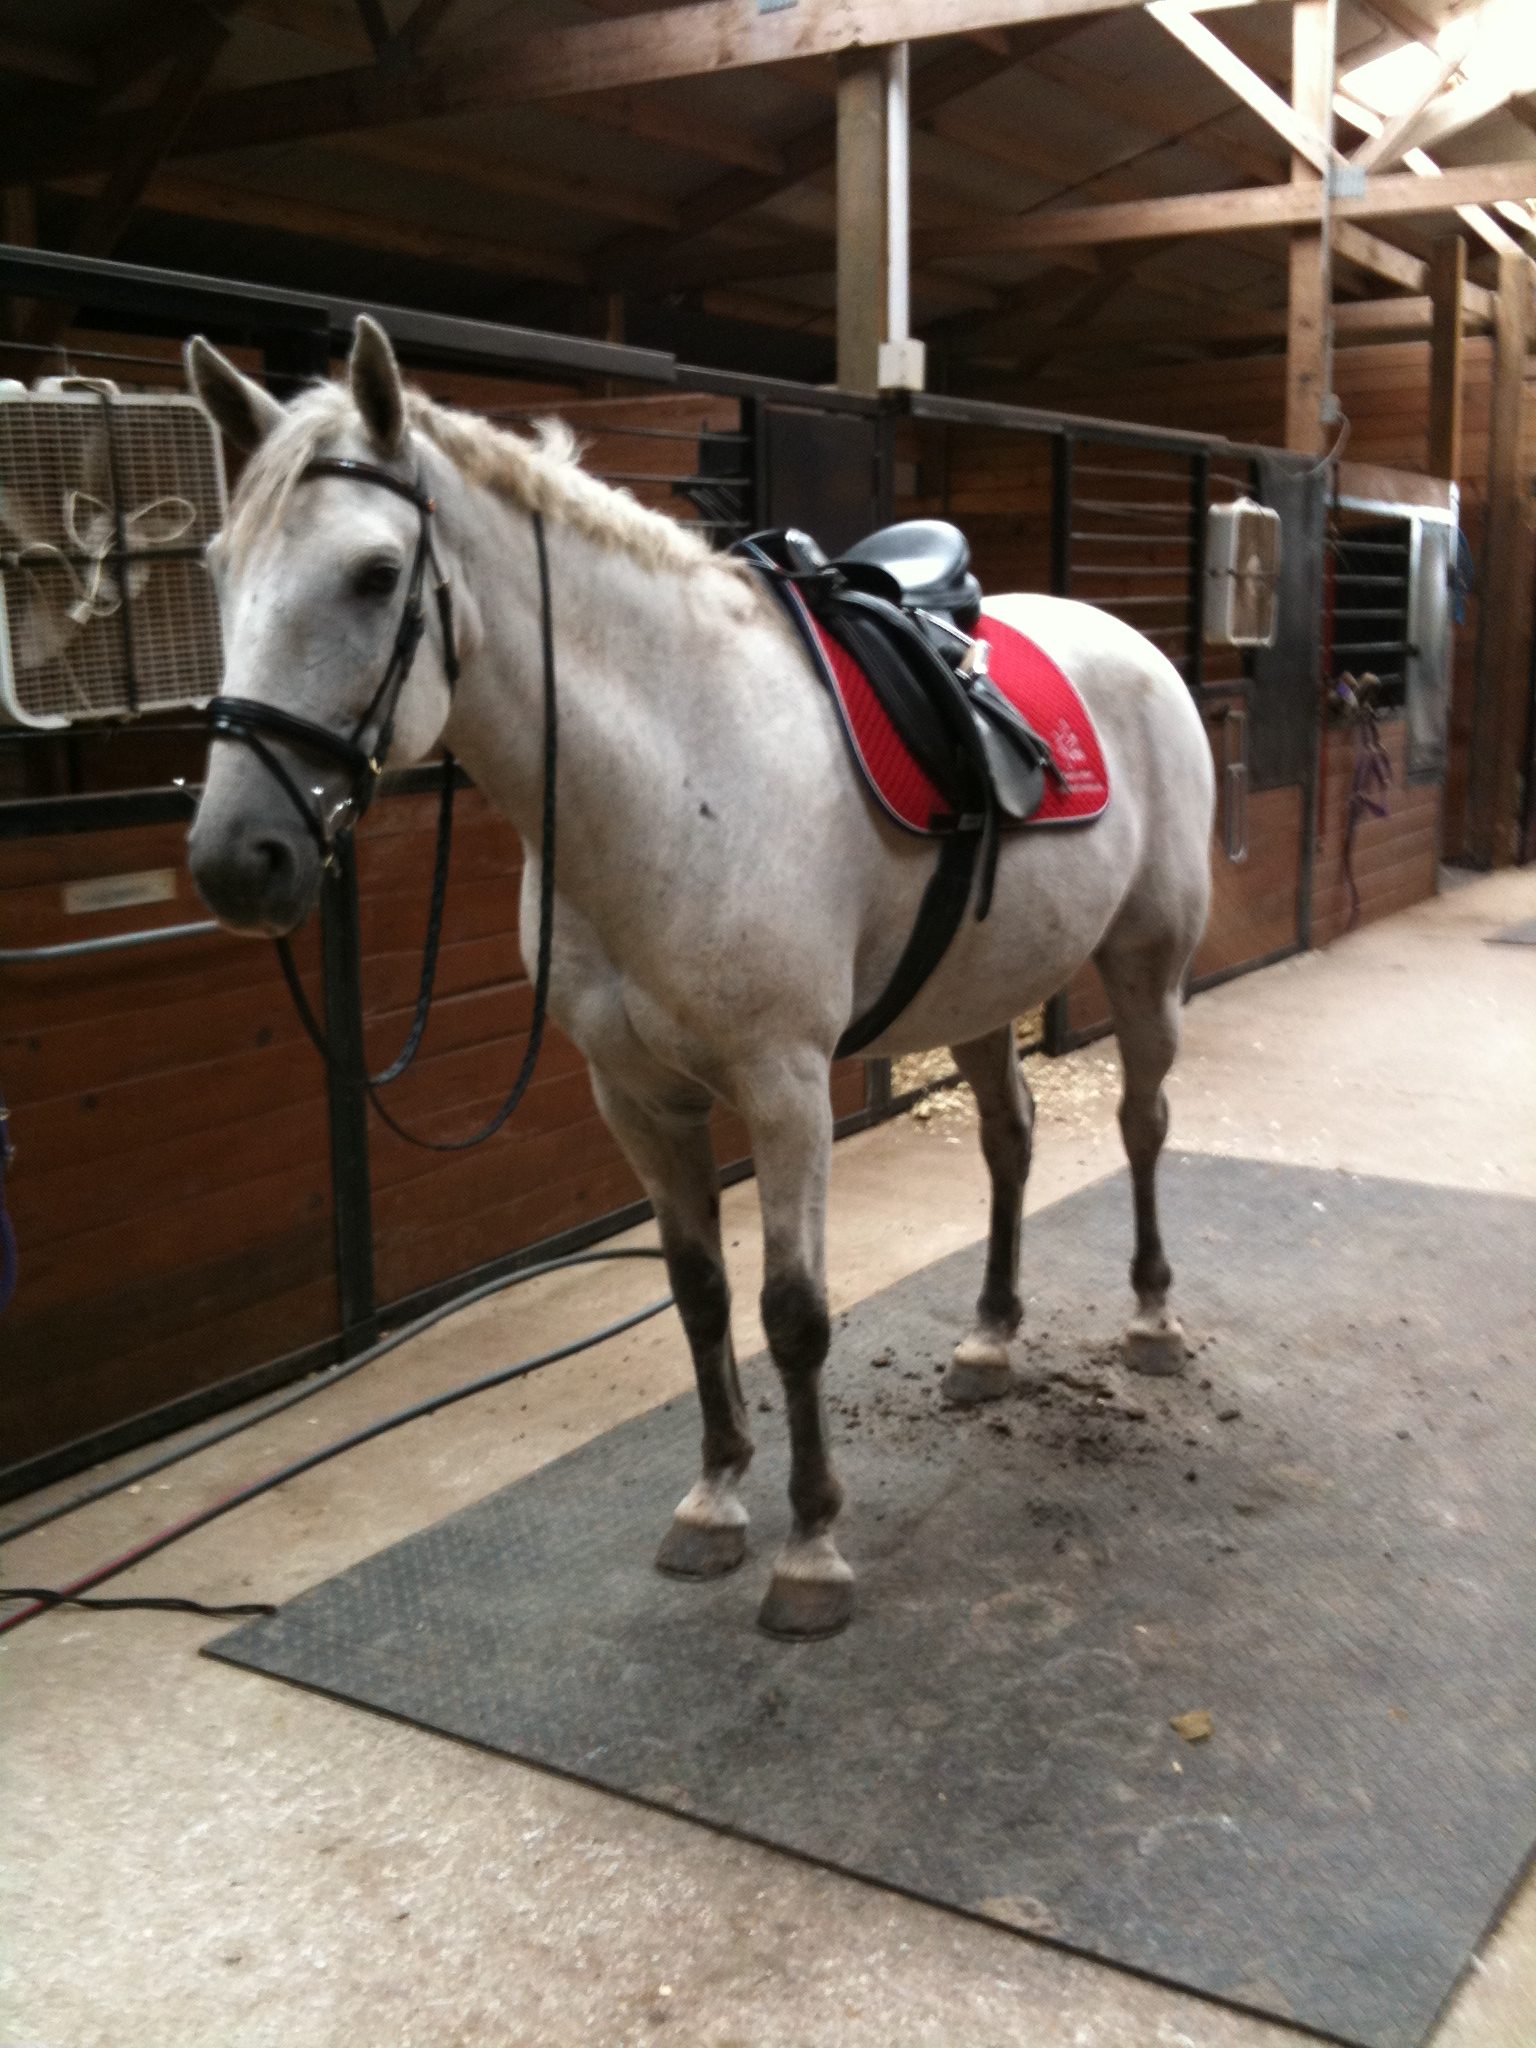 Once a horse is wearing the equipment needed for riding, they are said to be "tacked up."